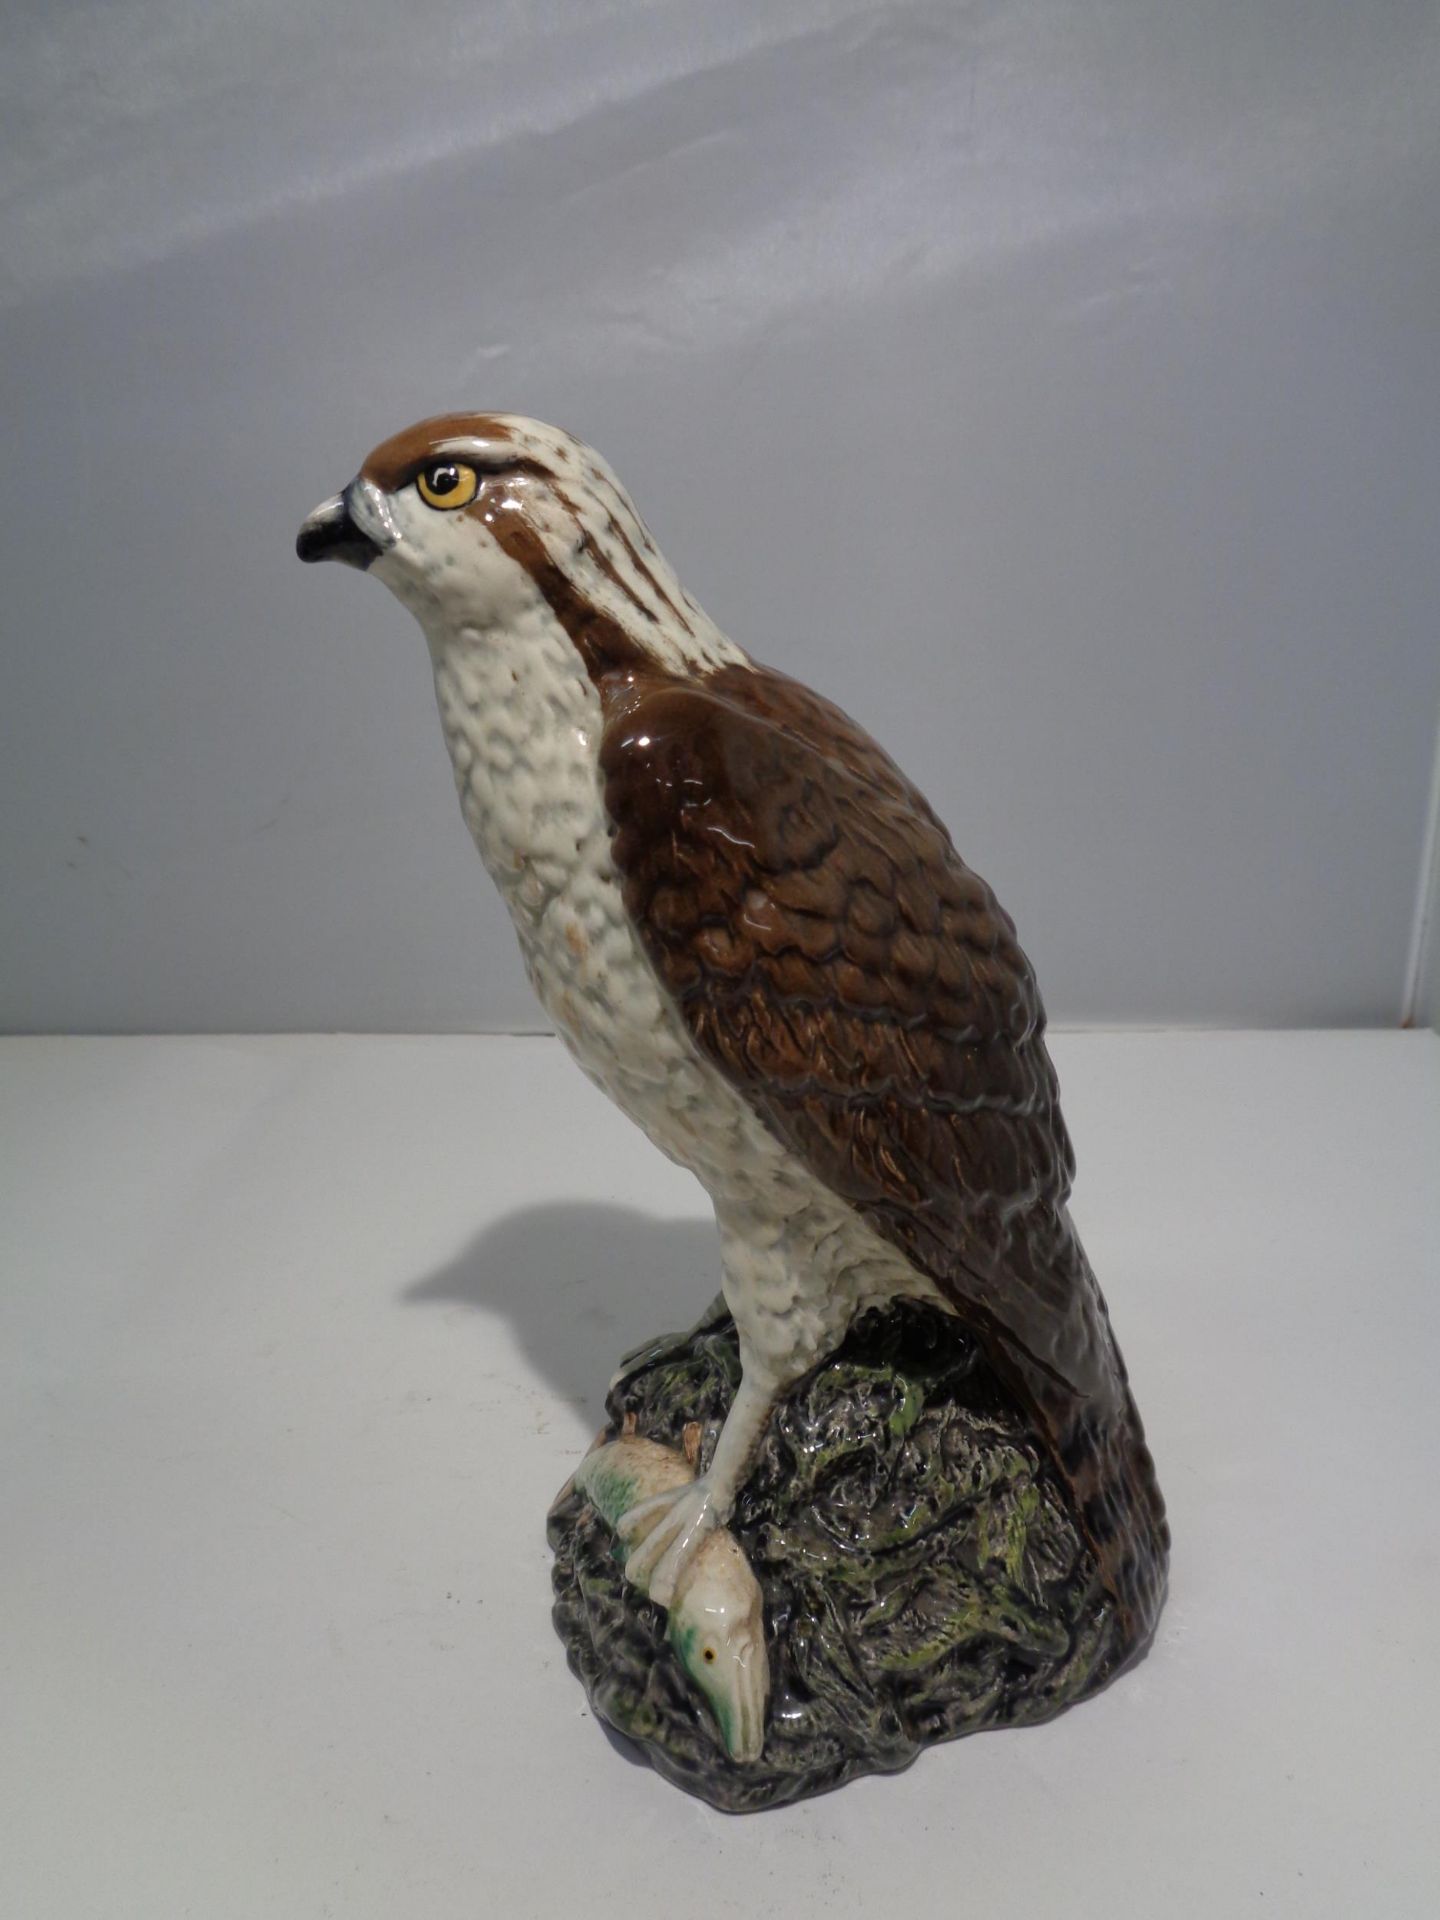 A CERAMIC OSPREY BENEAGLES WHISKEY DECANTER BY BESWICK - Image 2 of 4